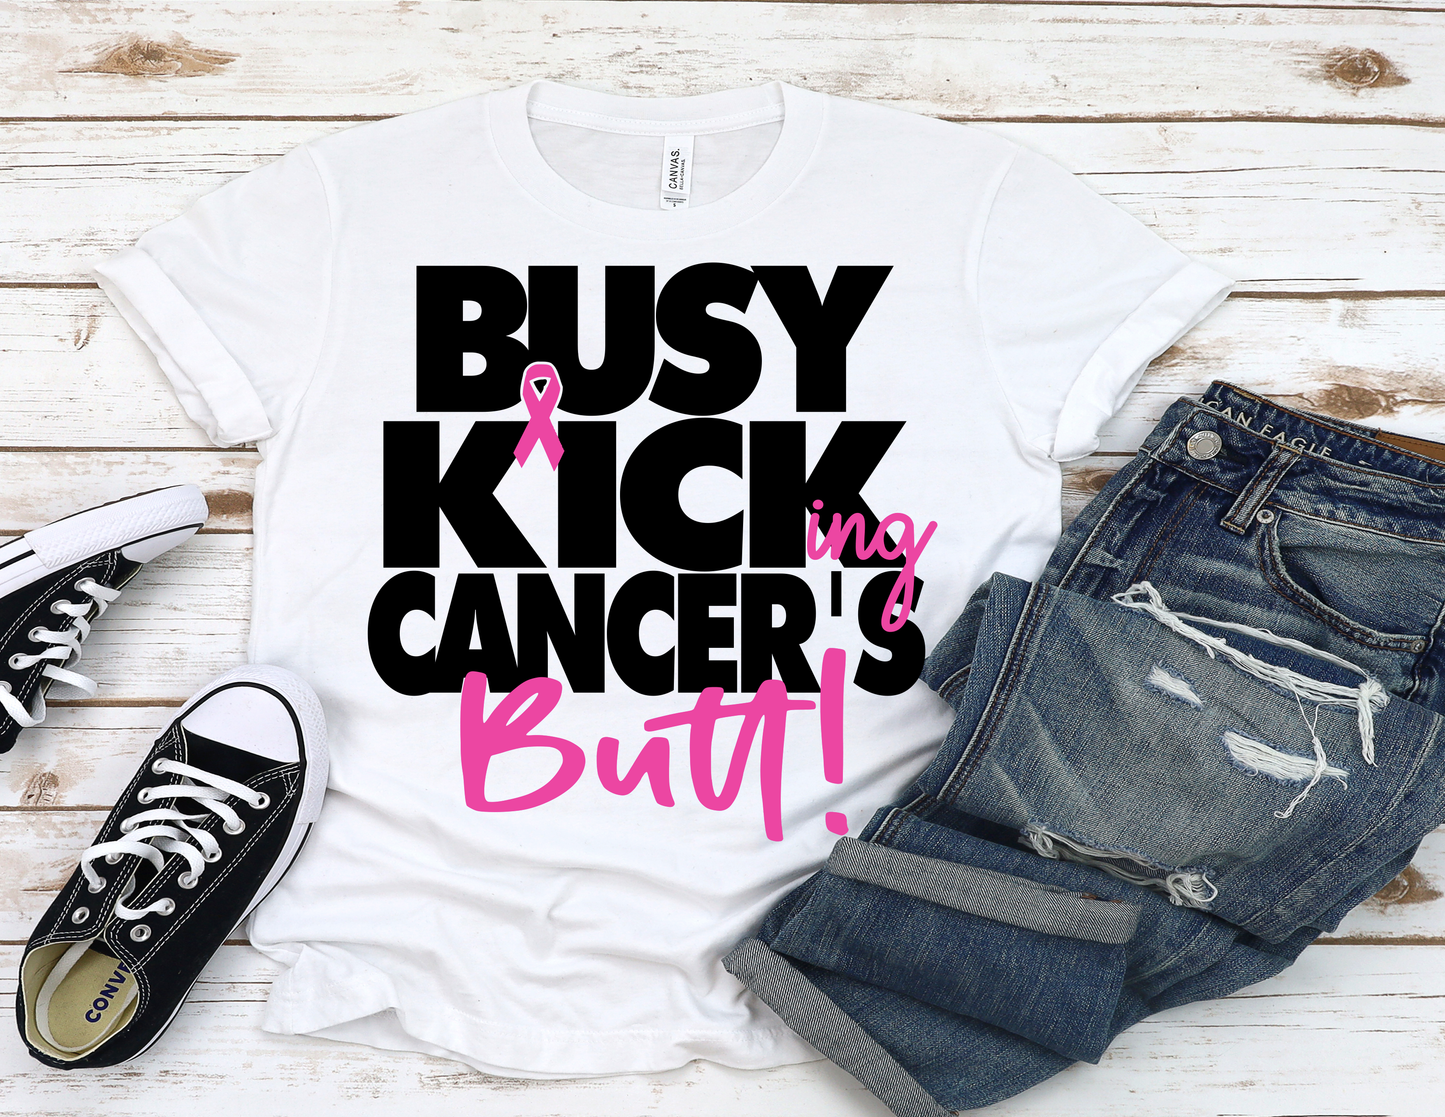 Busy Kicking Cancer's Butt